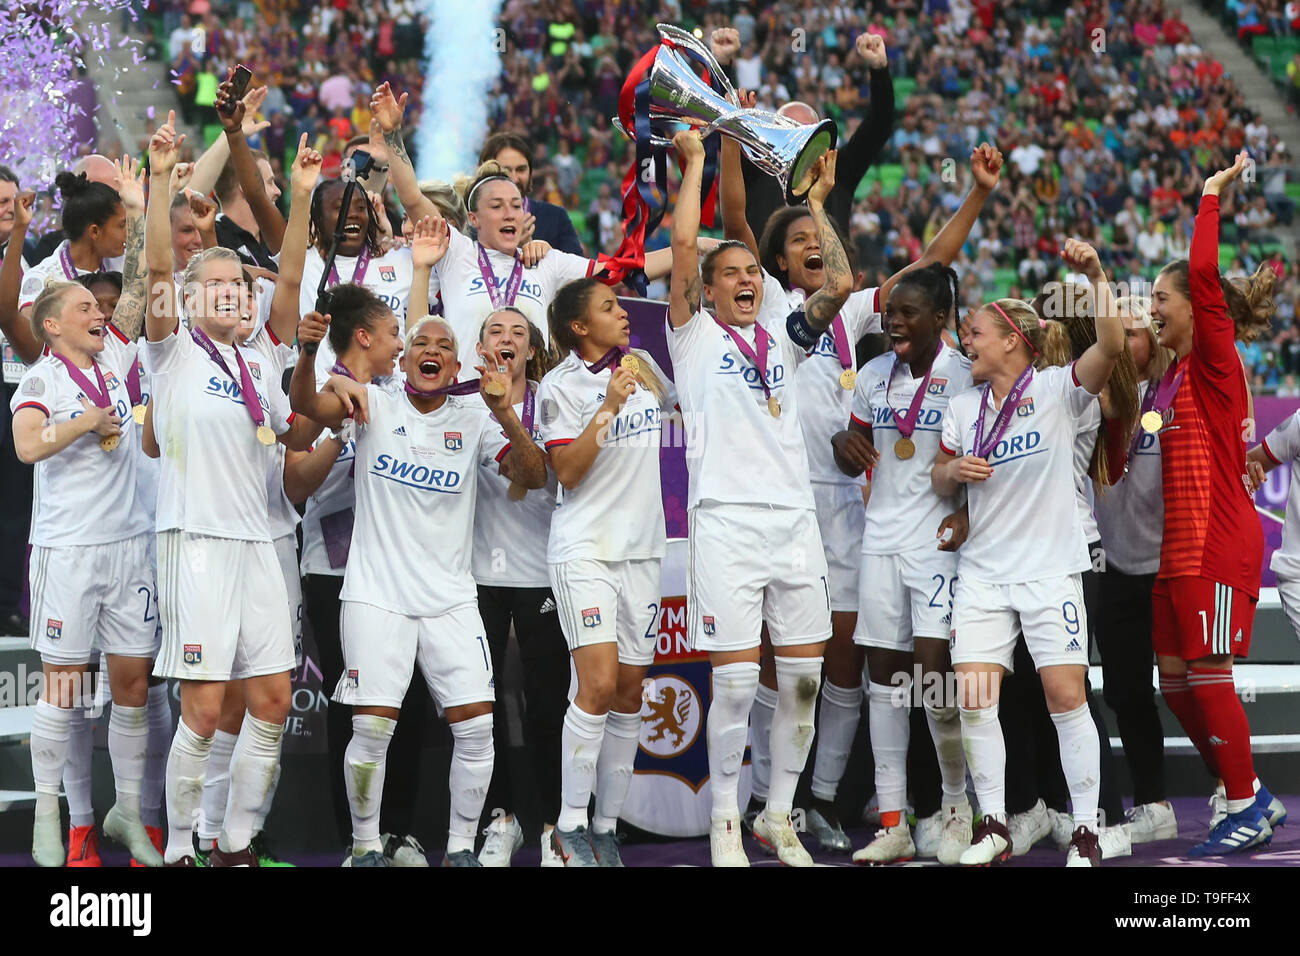 Budapest, Hungary. 18th May, 2019. Olympique Lyonnais players celebrate  with Trophy during the UEFA Women's Champions League Final between  Olympique Lyonnais and FC Barcelona Women at Groupama Arena on May 18, 2019